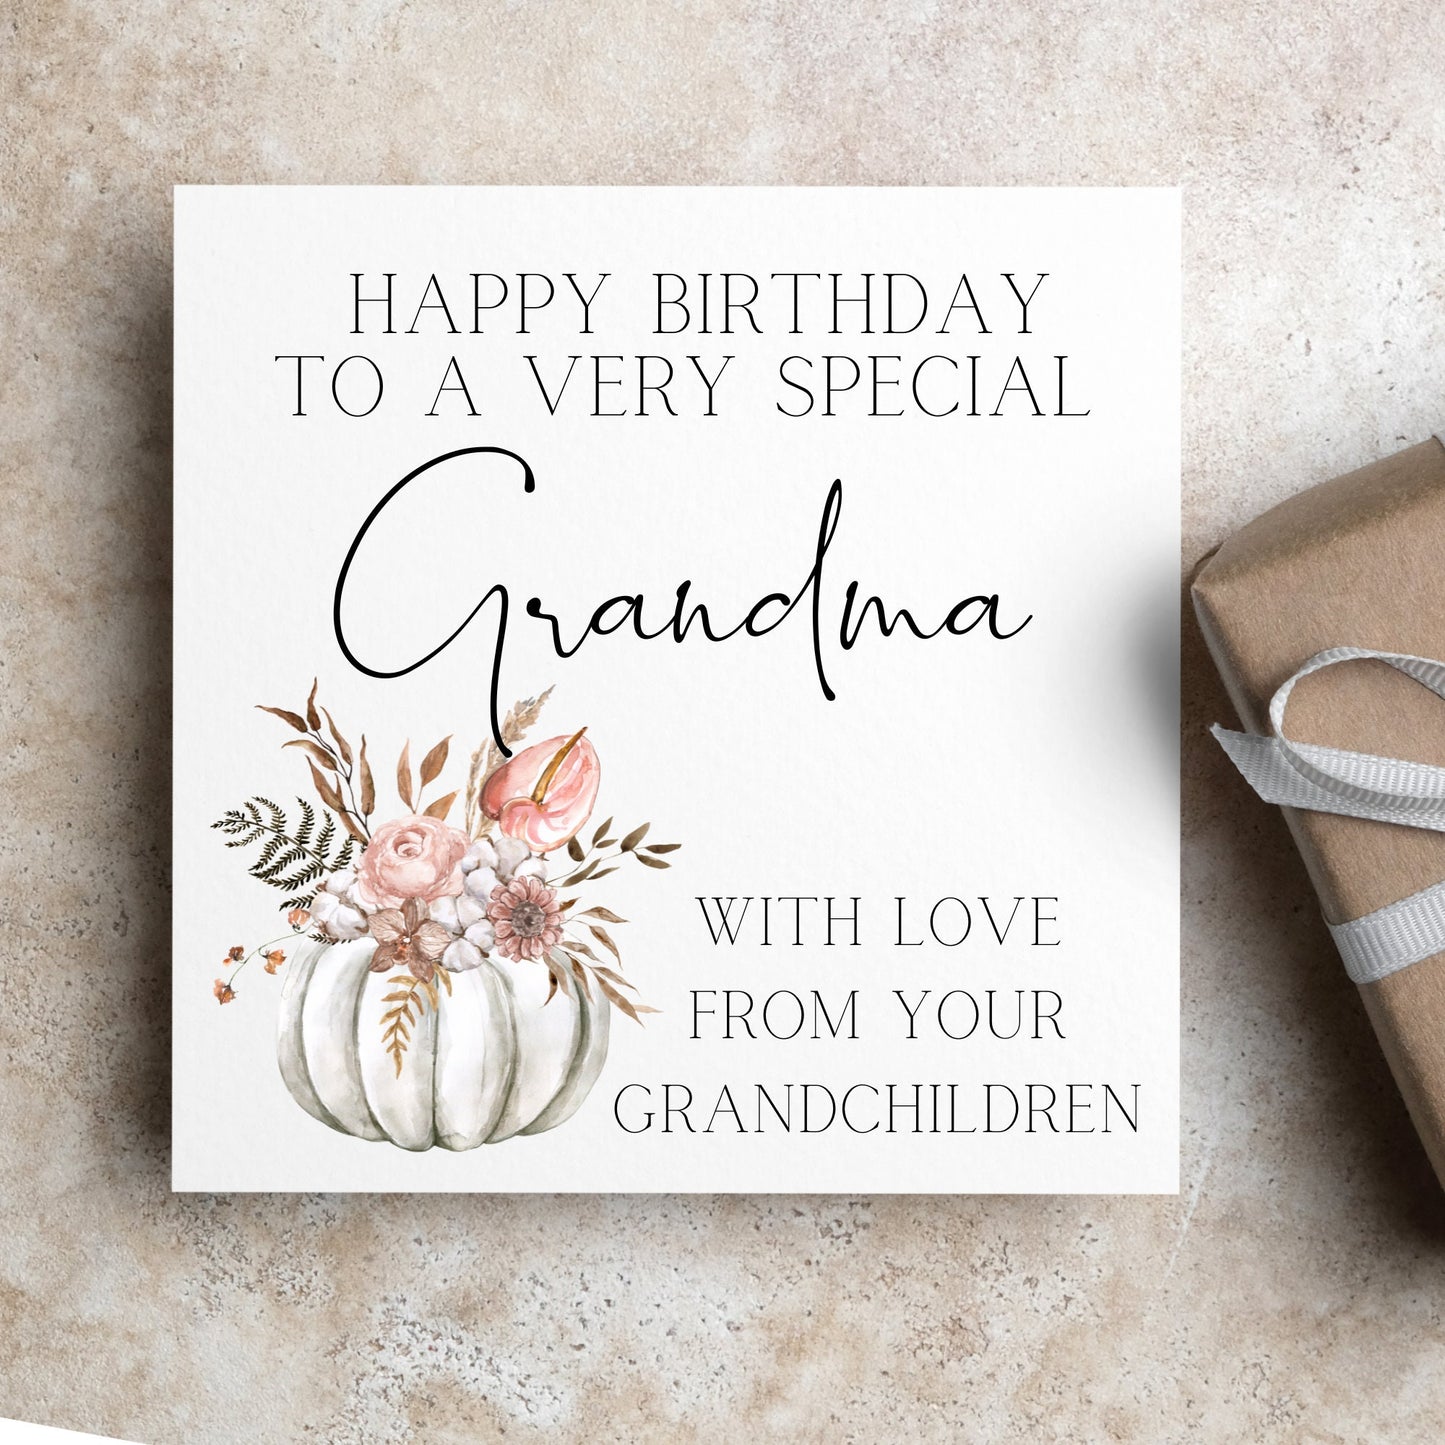 Happy birthday to a special grandma from grandchildren card, white pumpkin and flowers for a fall / autumn birthday